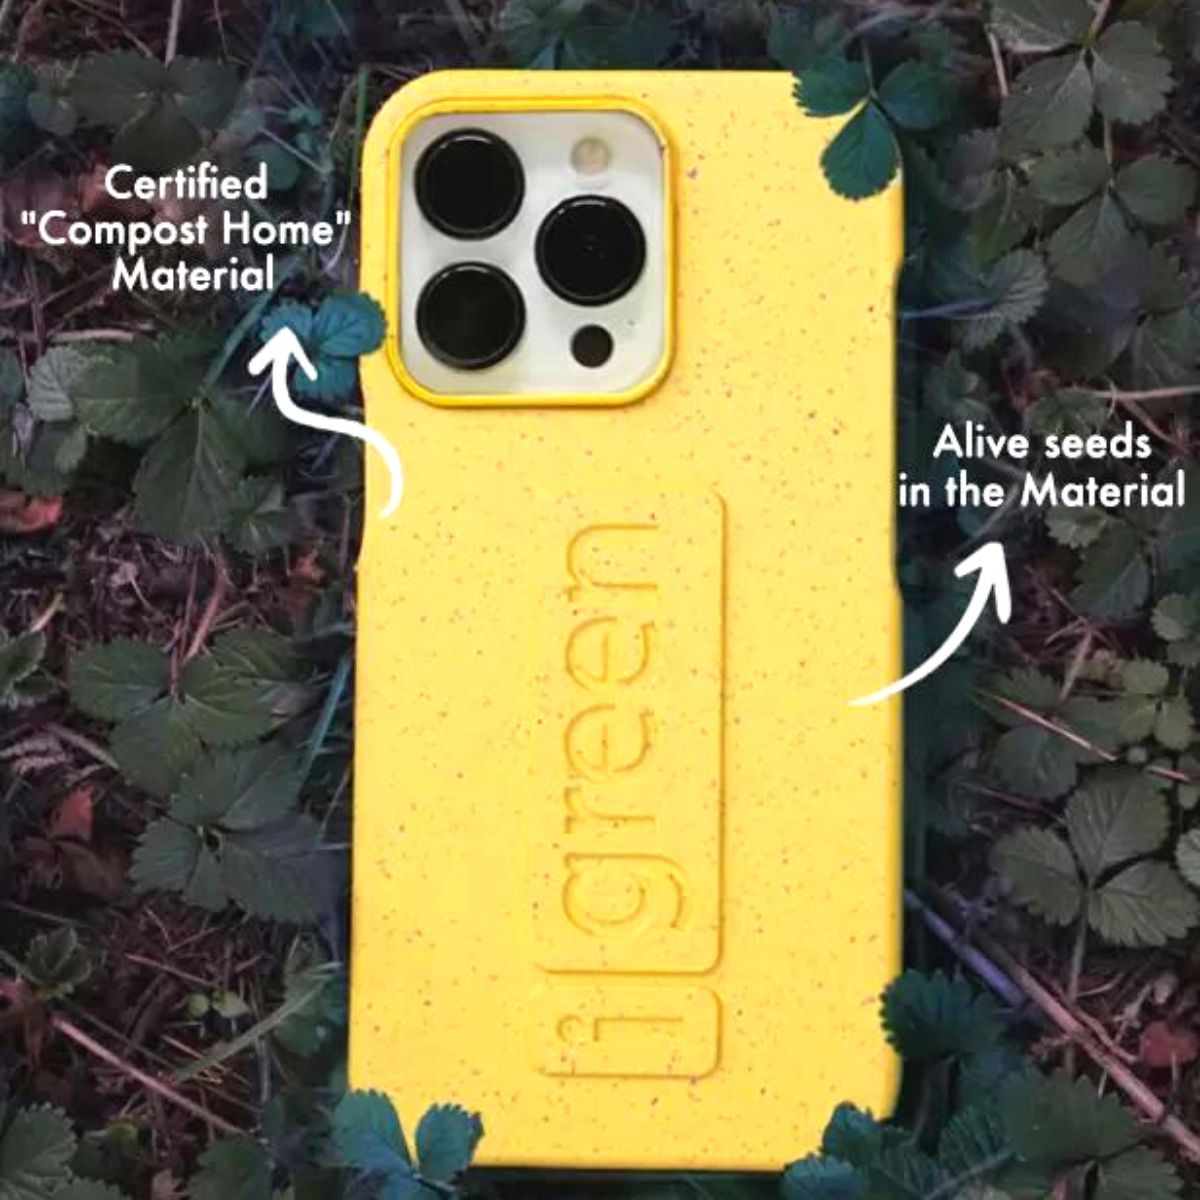 iGreen case in yellow sprouts daisies